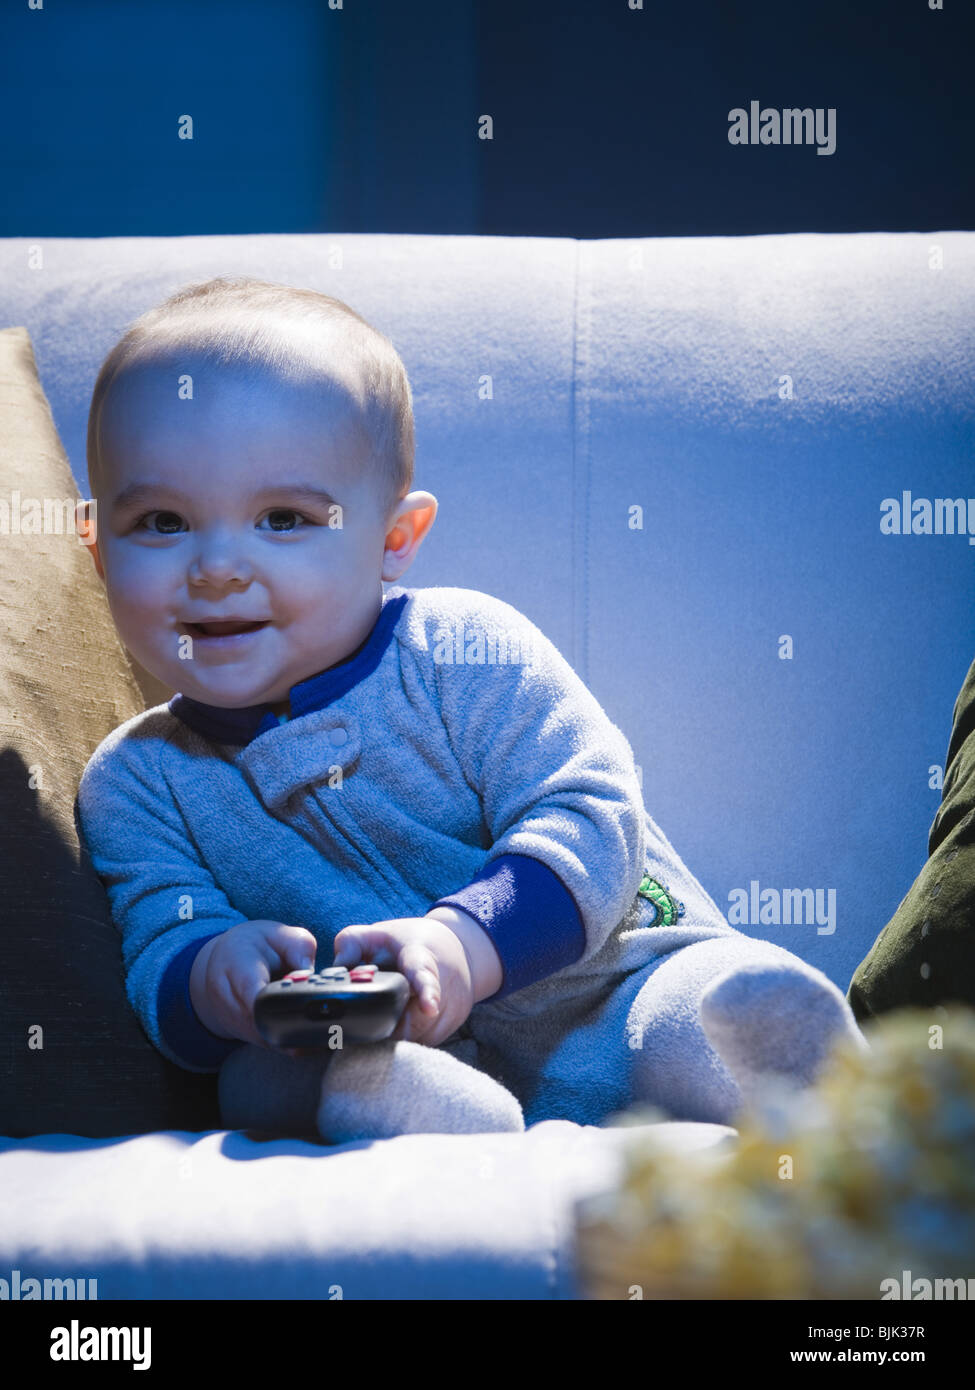 Baby on sofa with television remote smiling Stock Photo